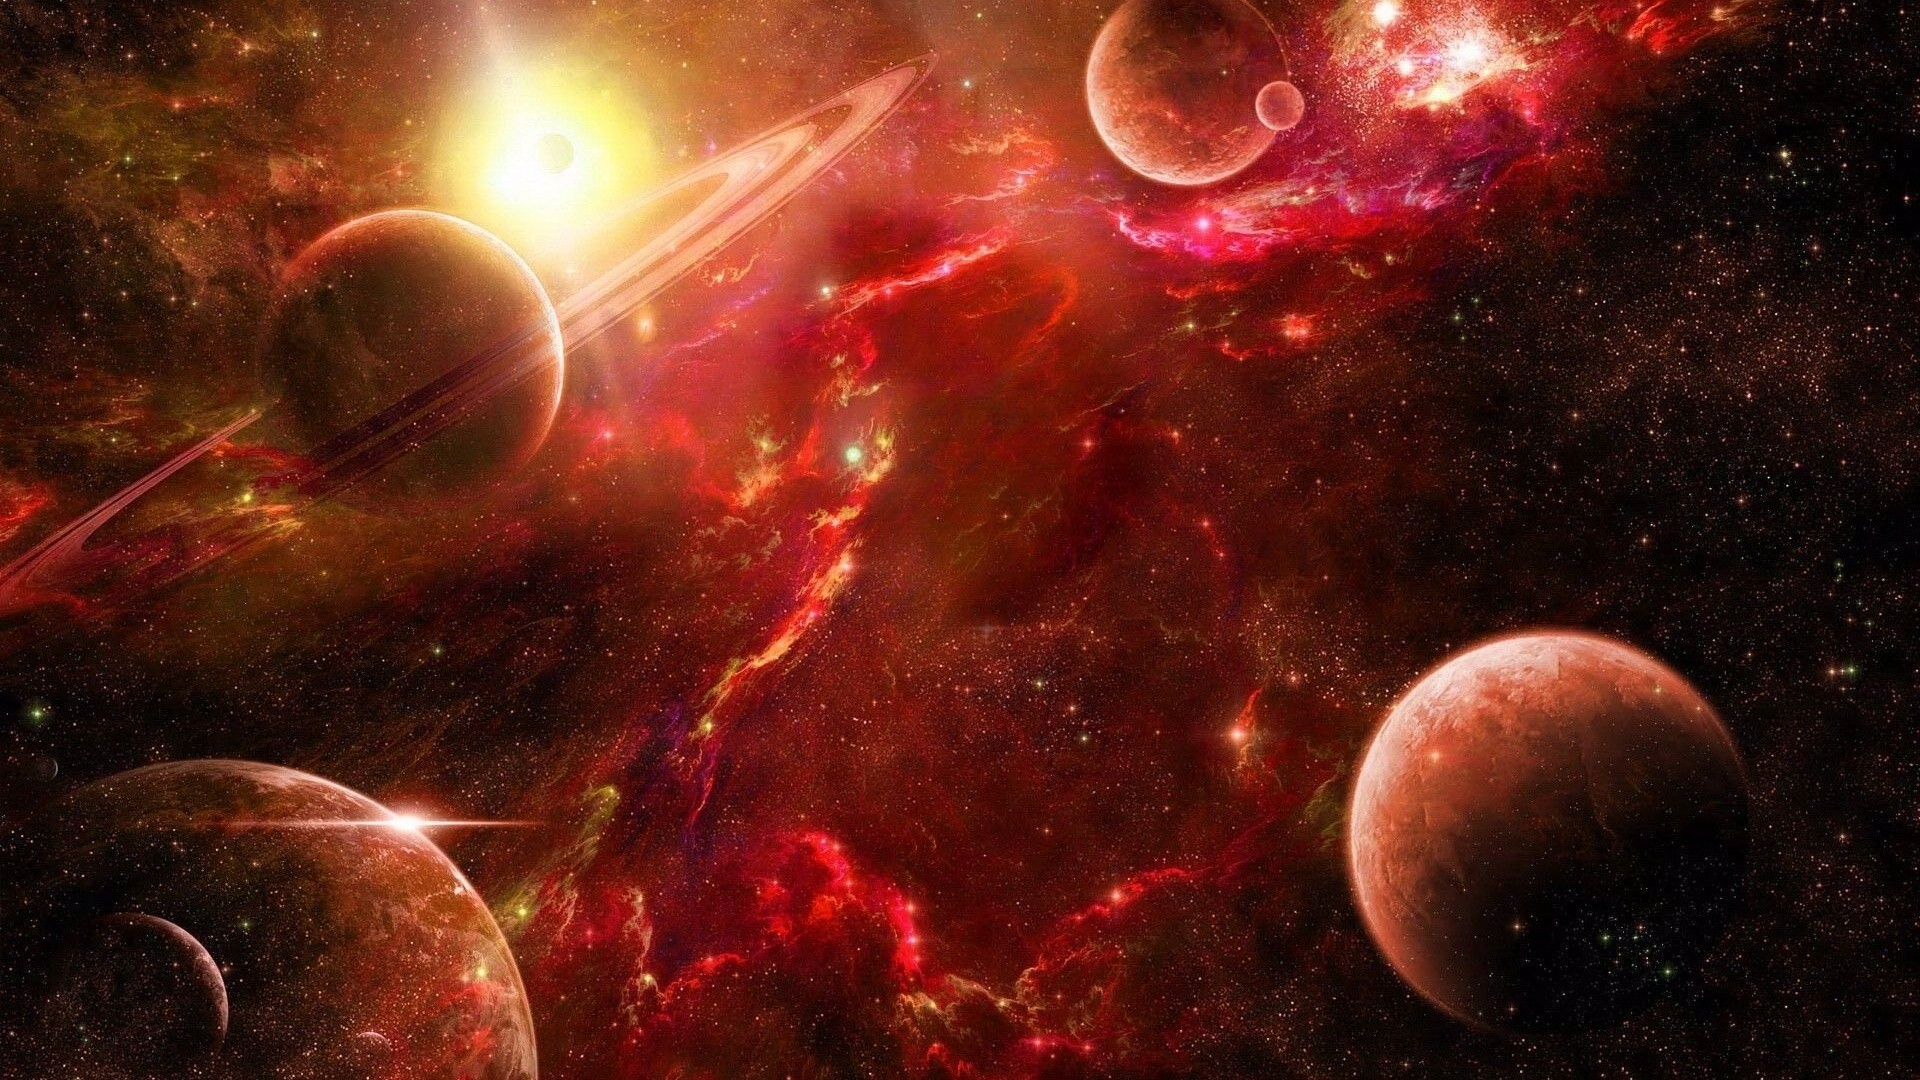 Outer Space HD Wallpaper